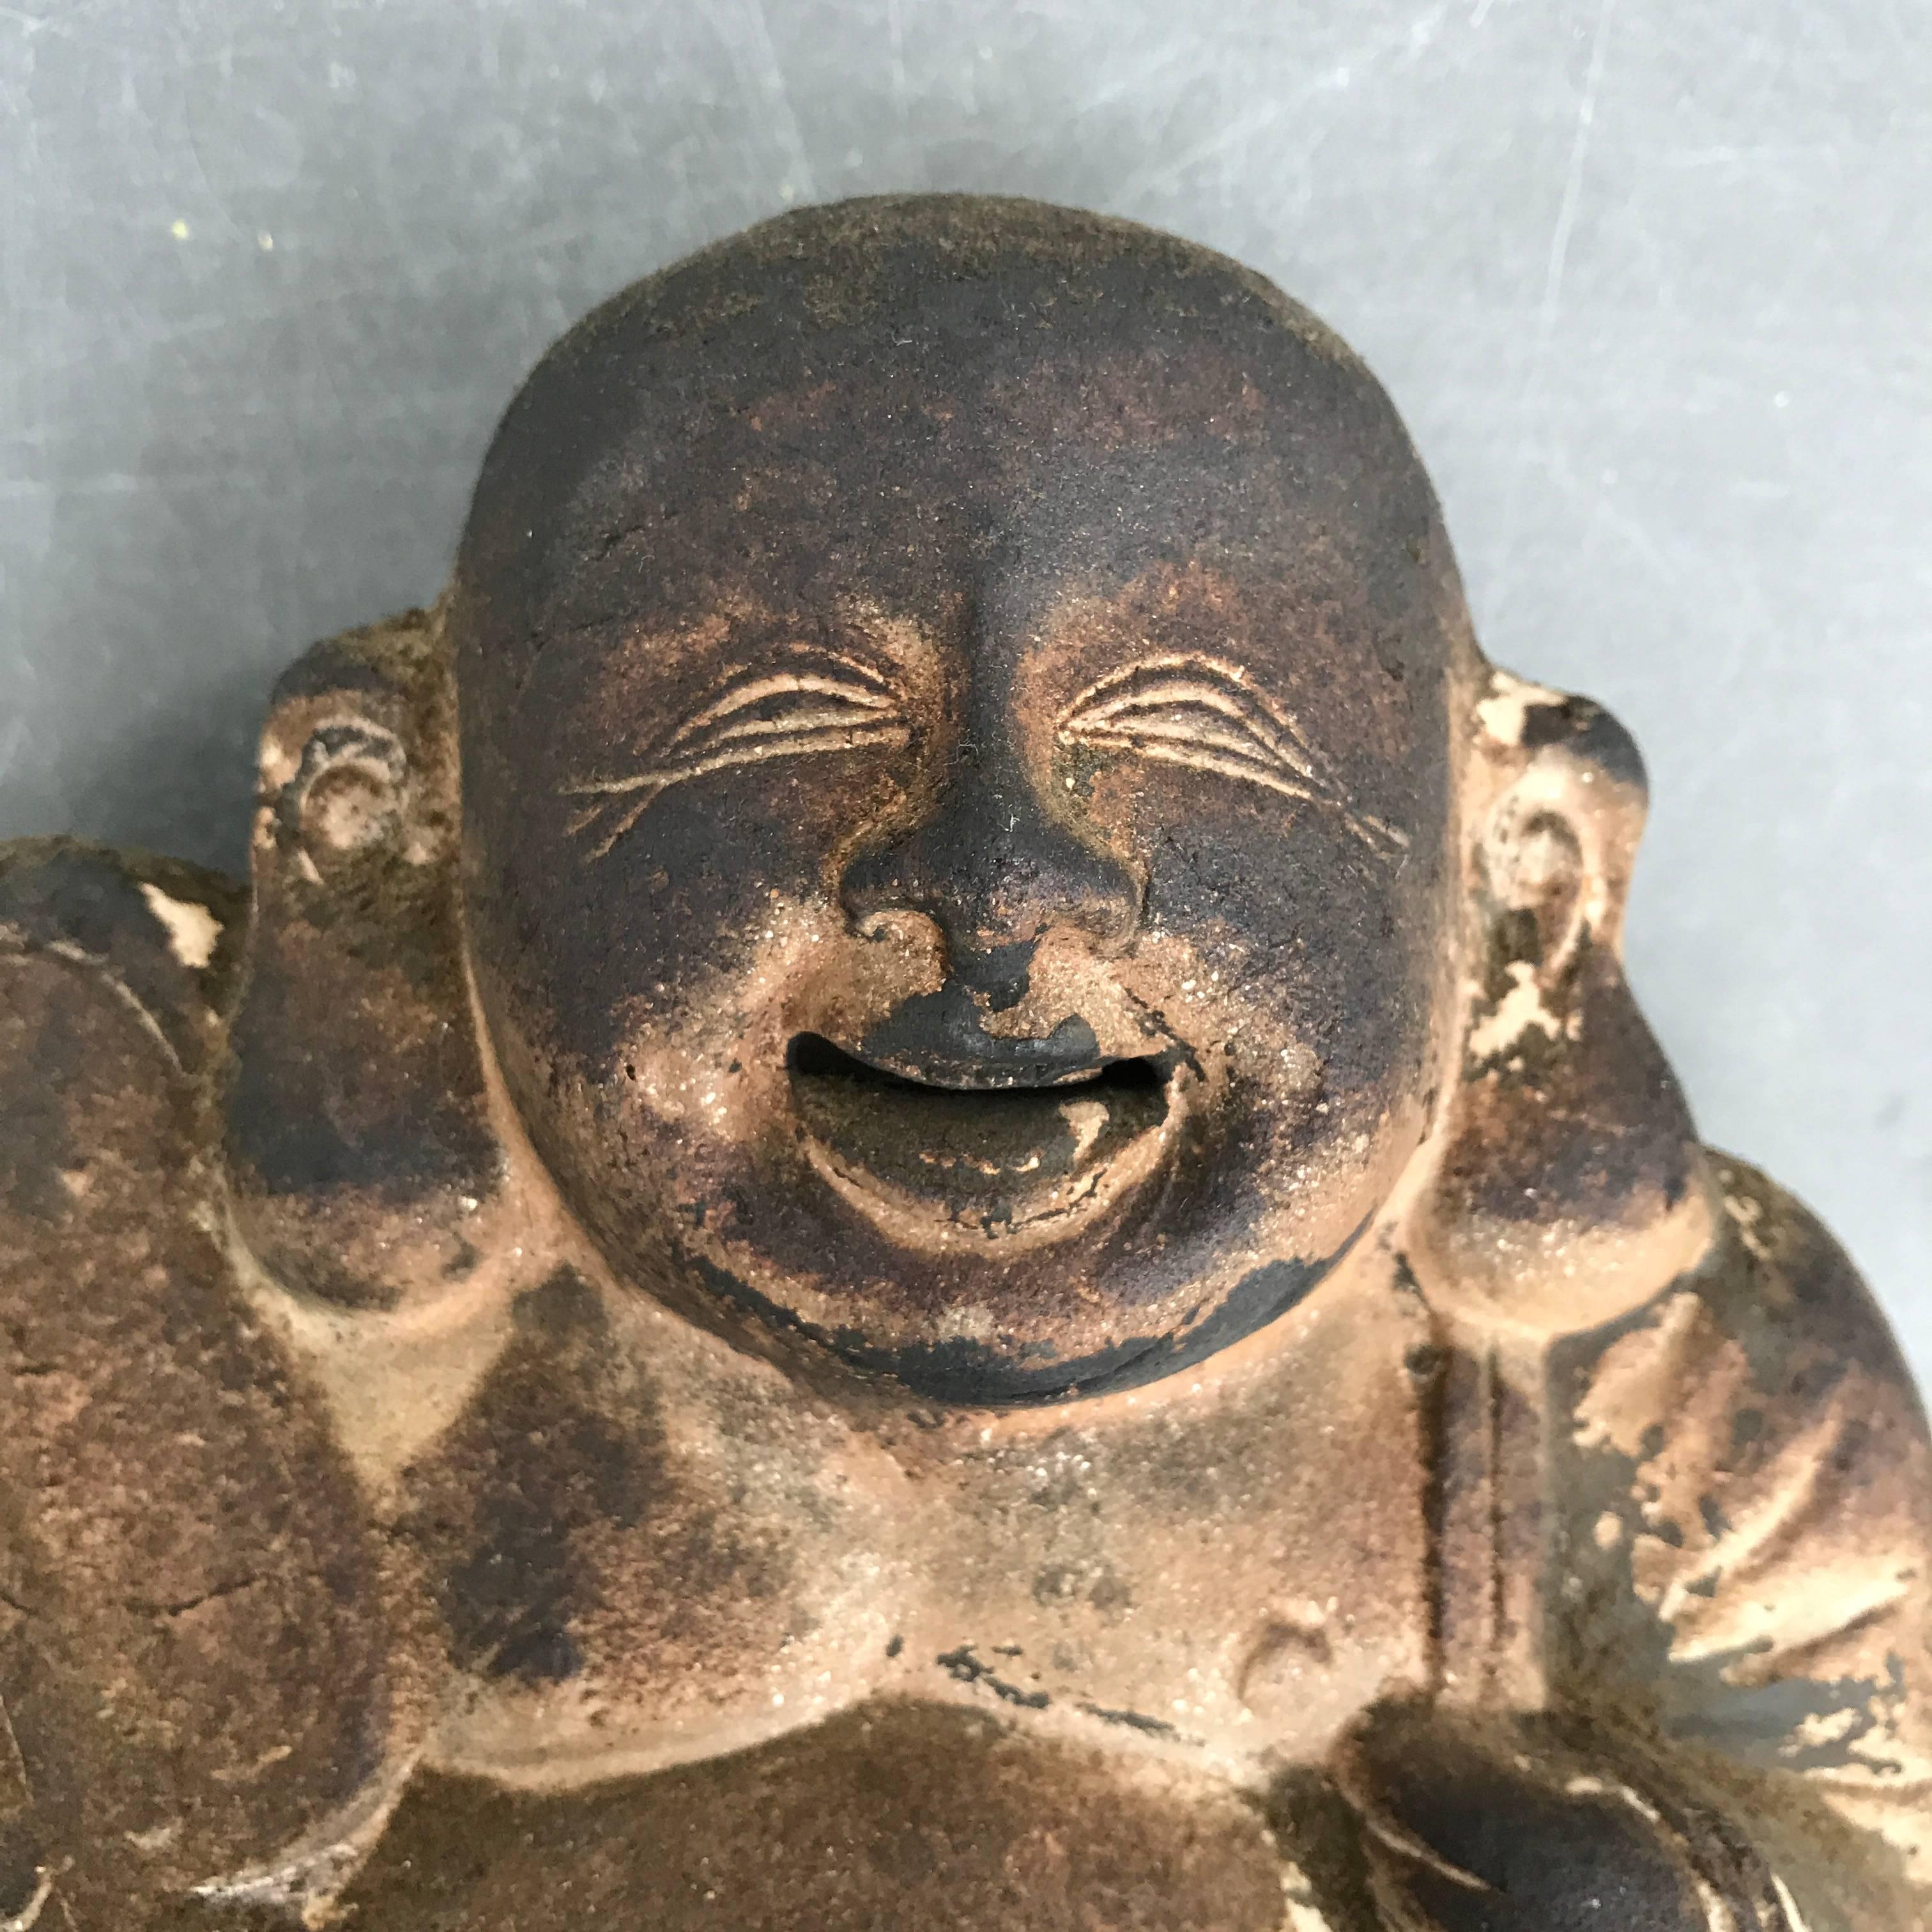 FEBRUARY SALE - NOW SAVE 25% AND MORE

An authentic Japanese time honored Folk Art sculptural symbol , Hotai San, found in old Japan's kitchen or hearth areas, usually seen on the top of the Mizuya Dansu- Kitchen Chest. 
 
He is a jolly protector of